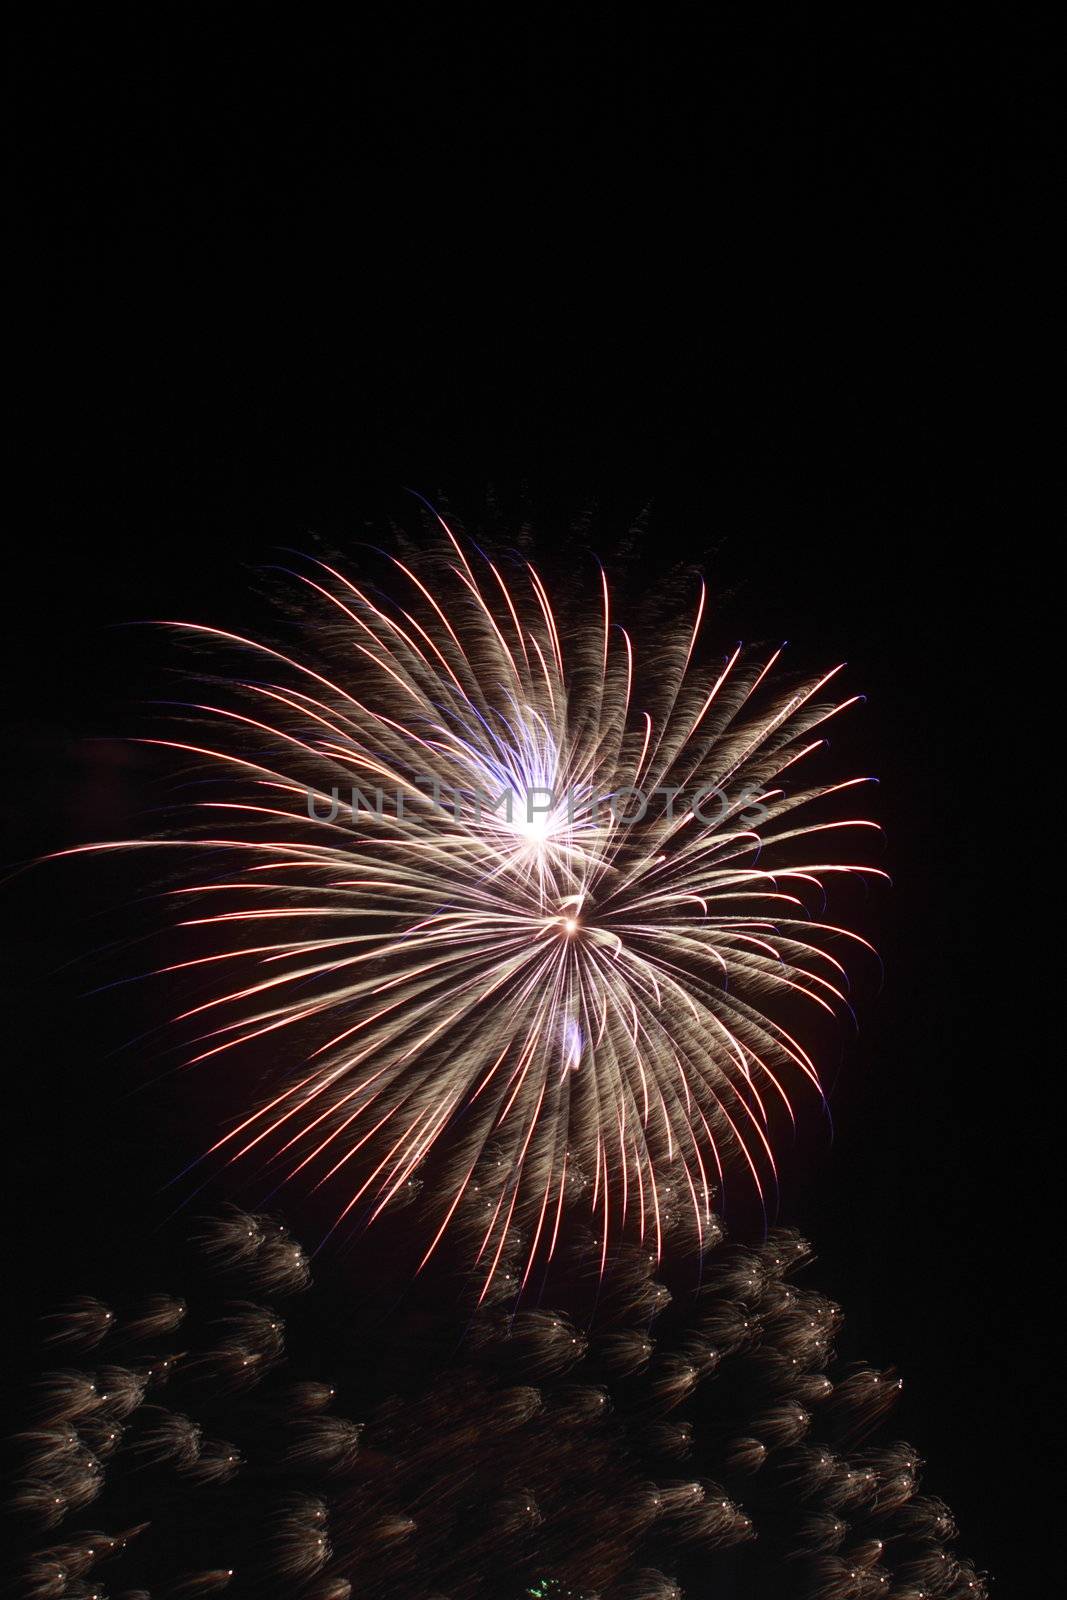 Japanese traditional fireworks in the night sky 